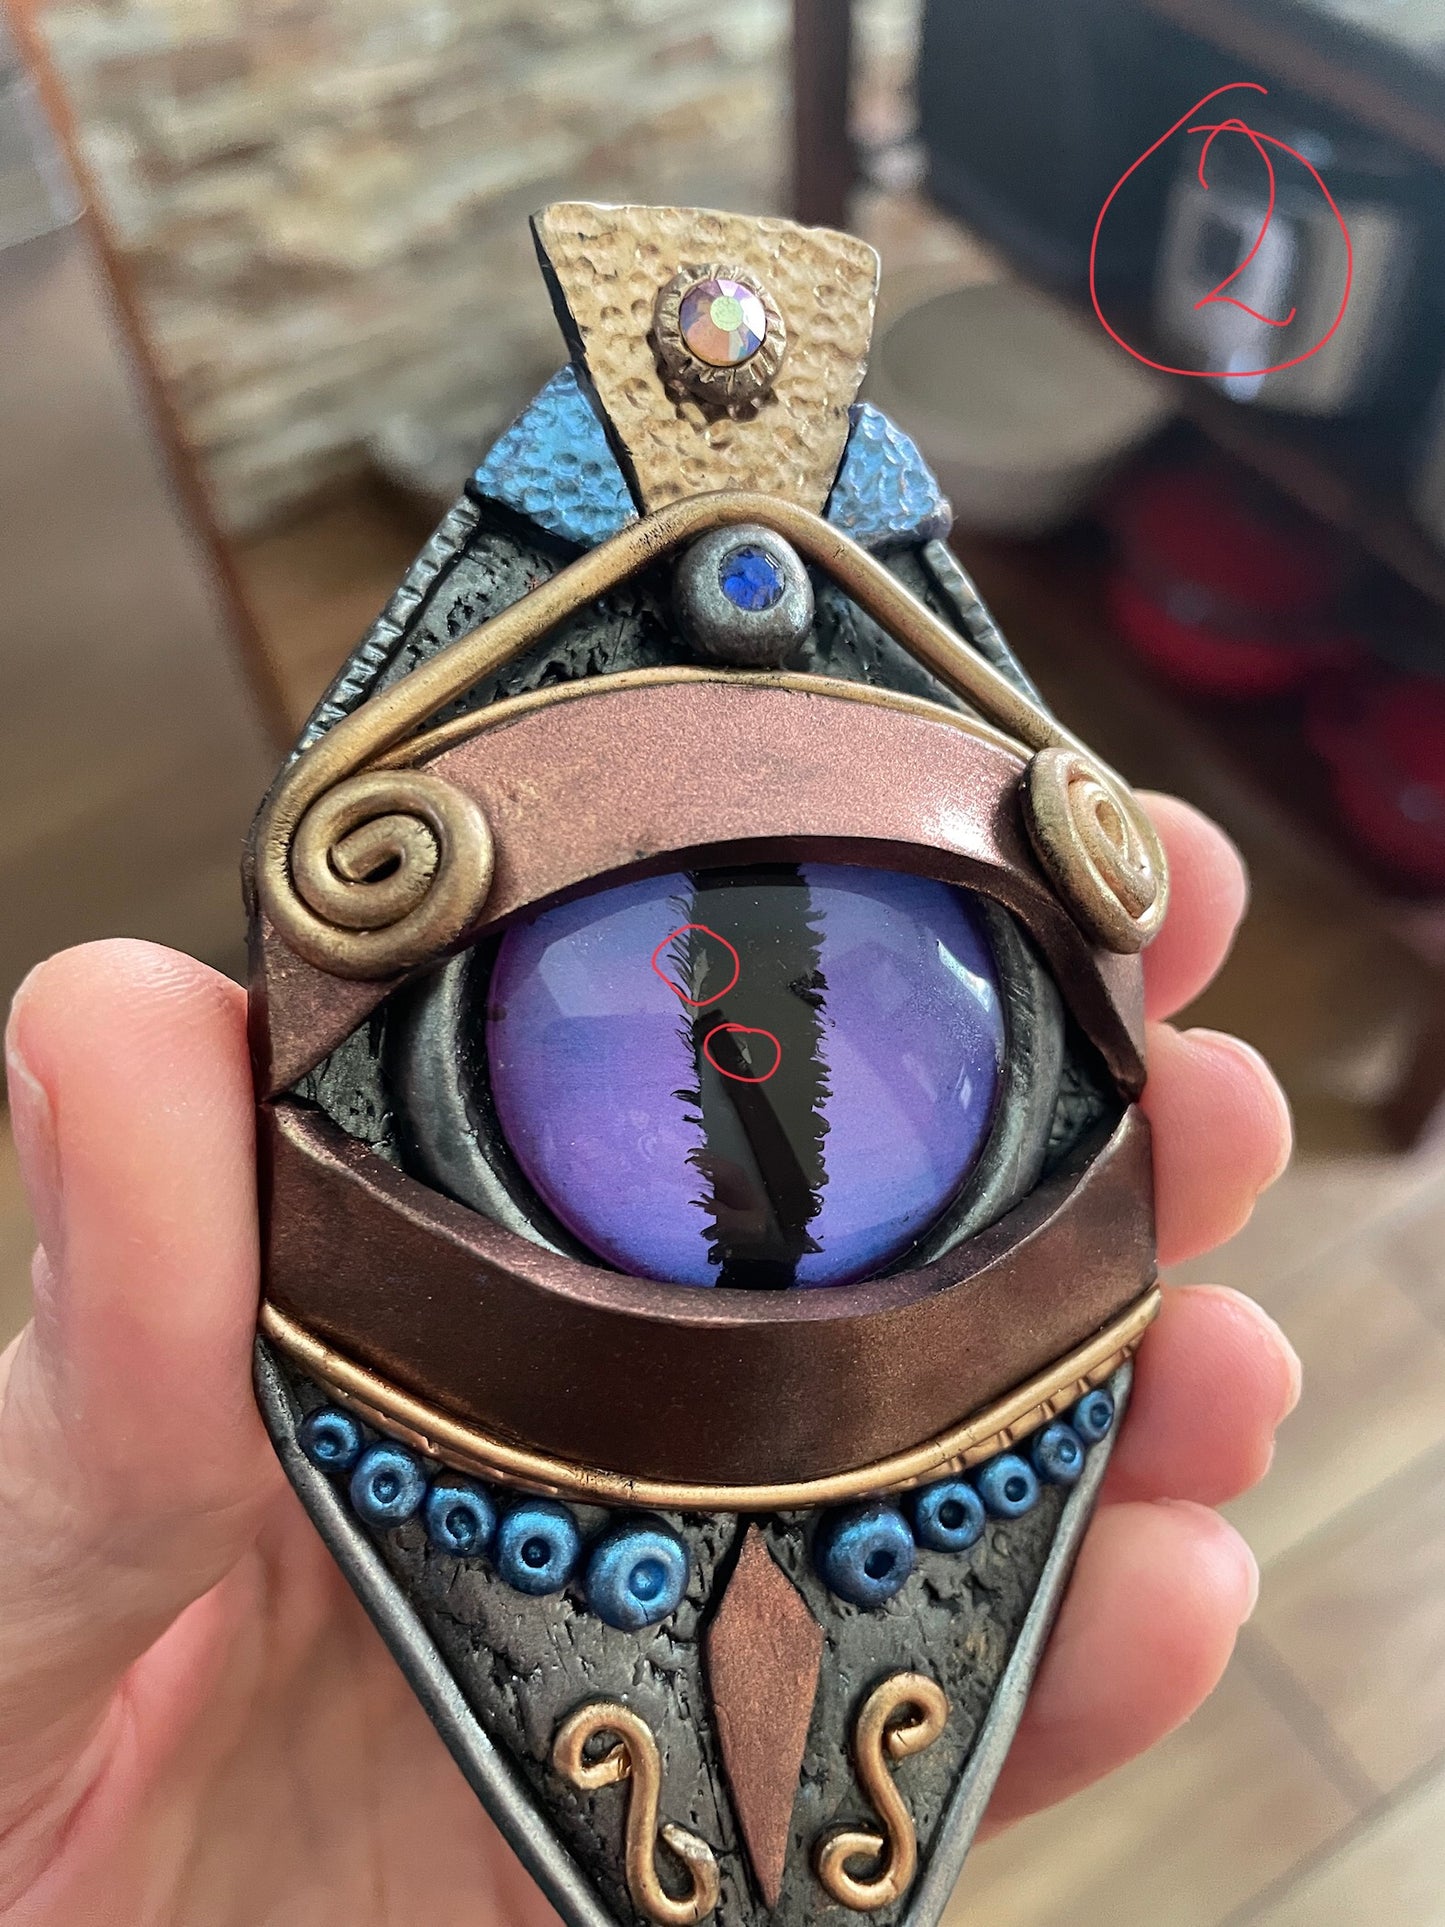 Dragon Eye Protection Talisman Necklace - SALE - Slightly Imperfect